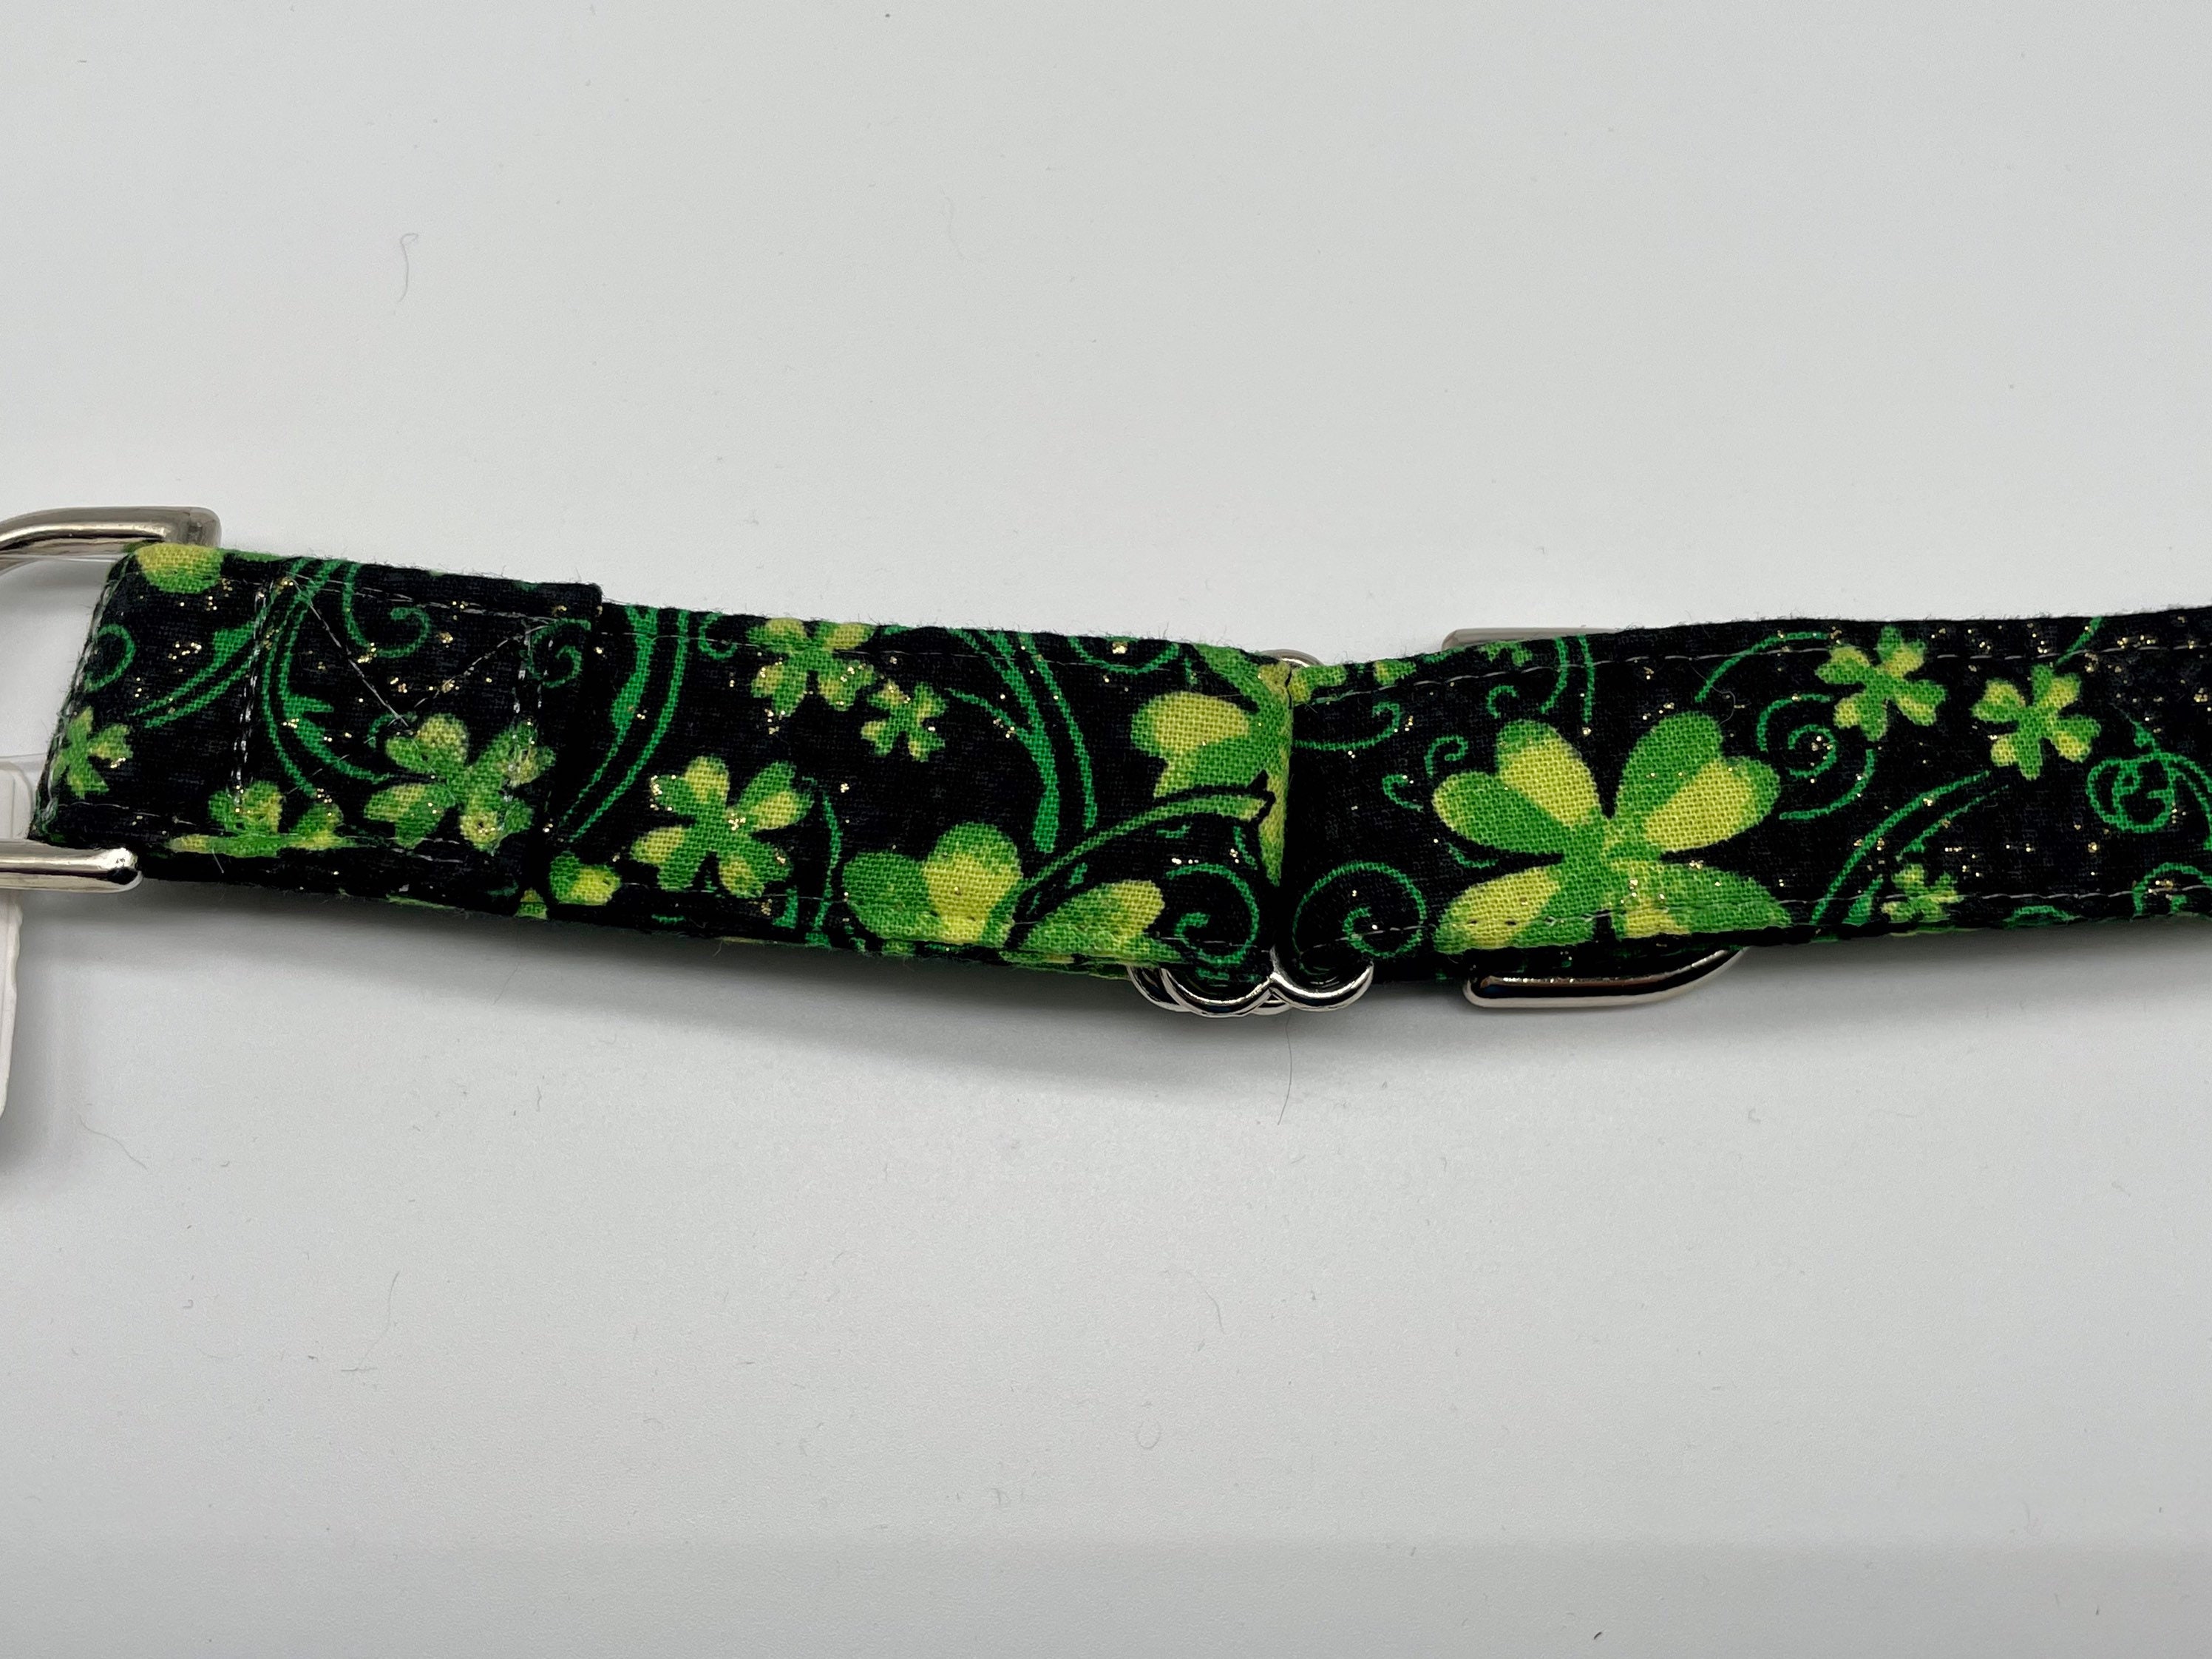 Medium 1 inch martingale collar the background is black with green shamrocks and gold glitter.